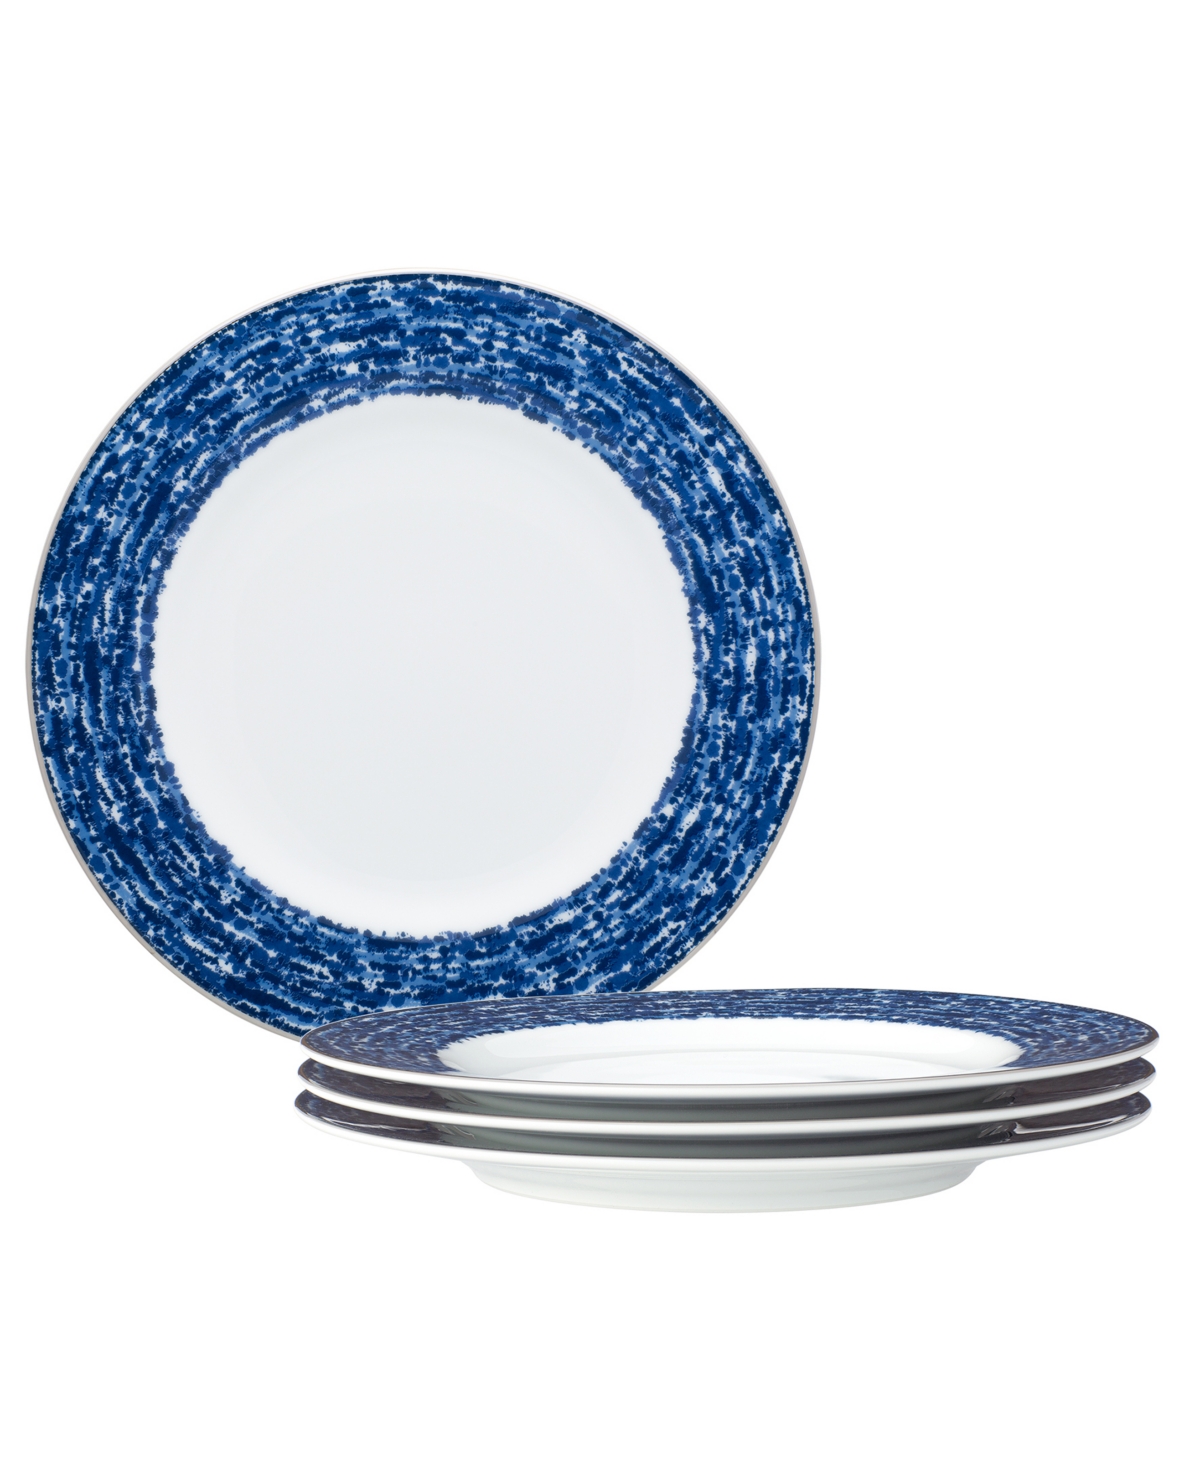 Noritake Rill 4 Piece Salad Plate Set, Service For 4 In Blue